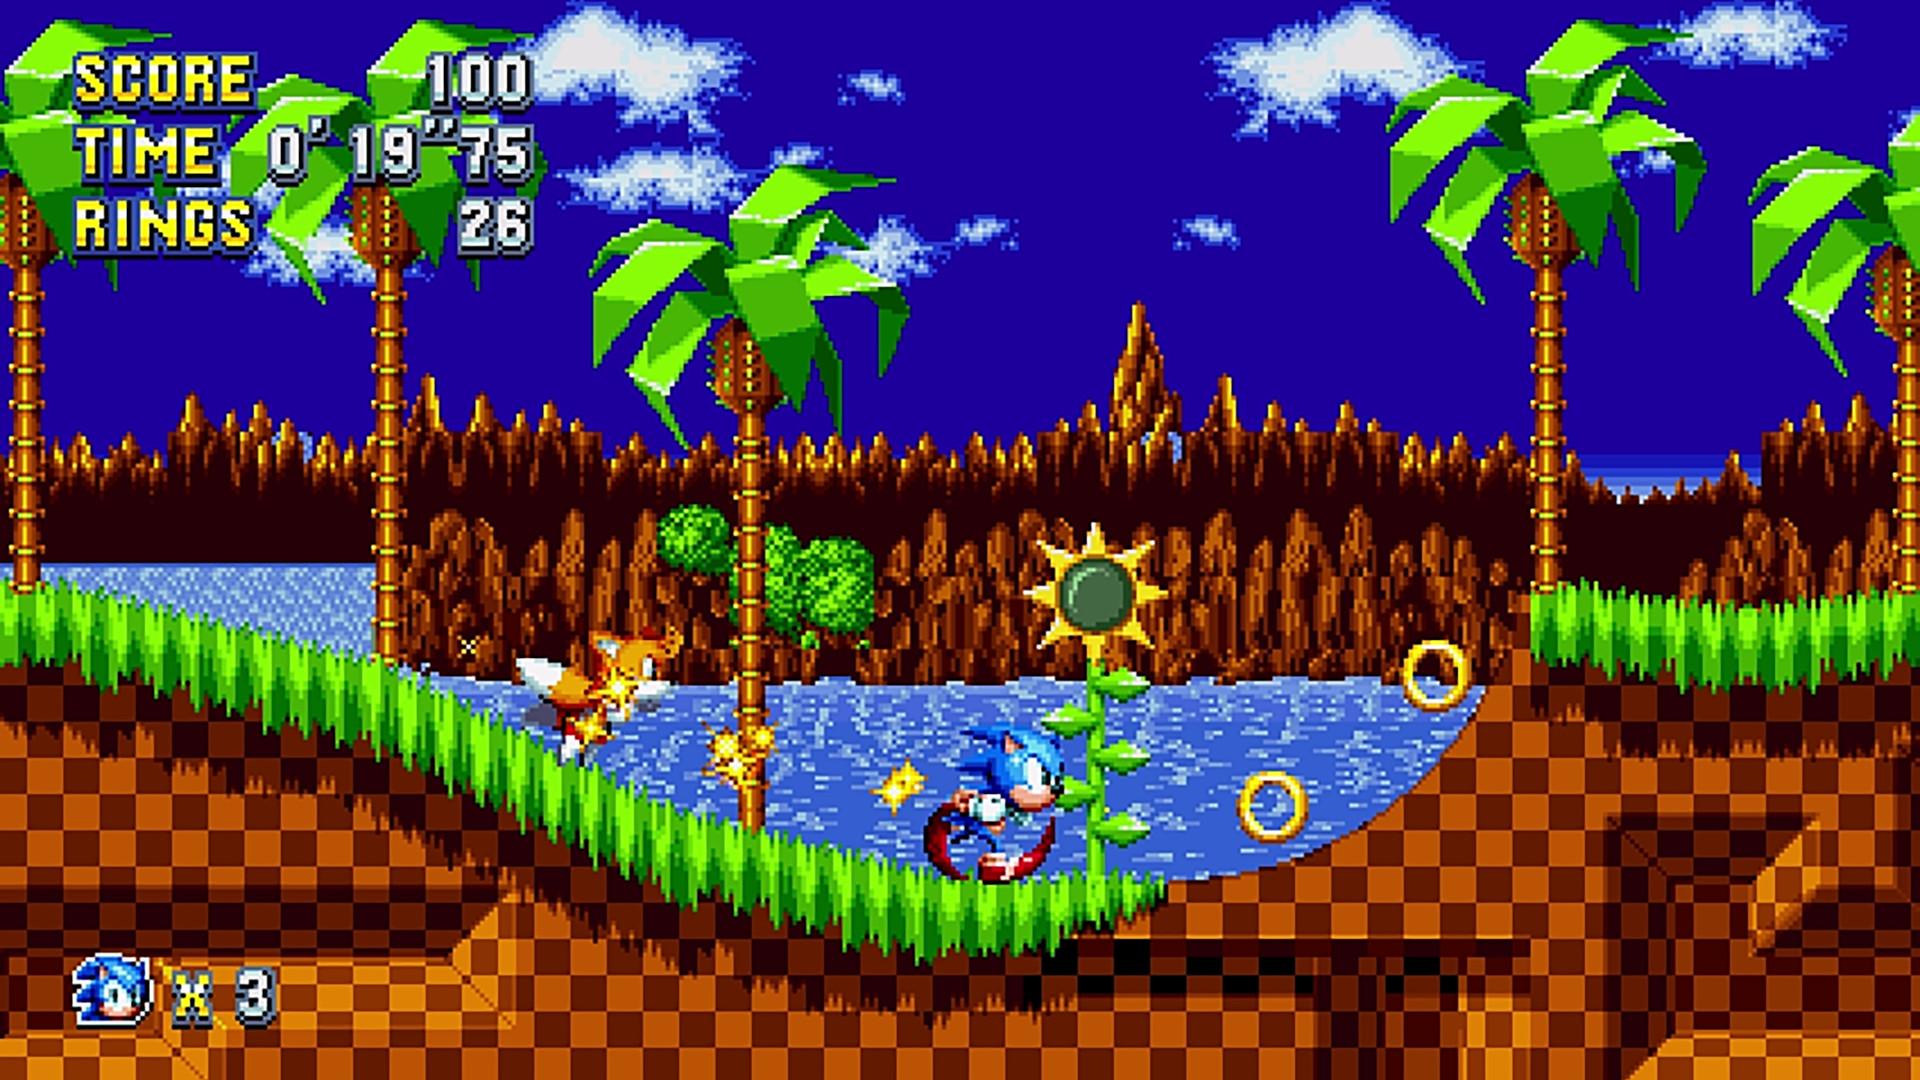 After Sonic Mania, Sega needs to make 2D Sonic games a priority ...